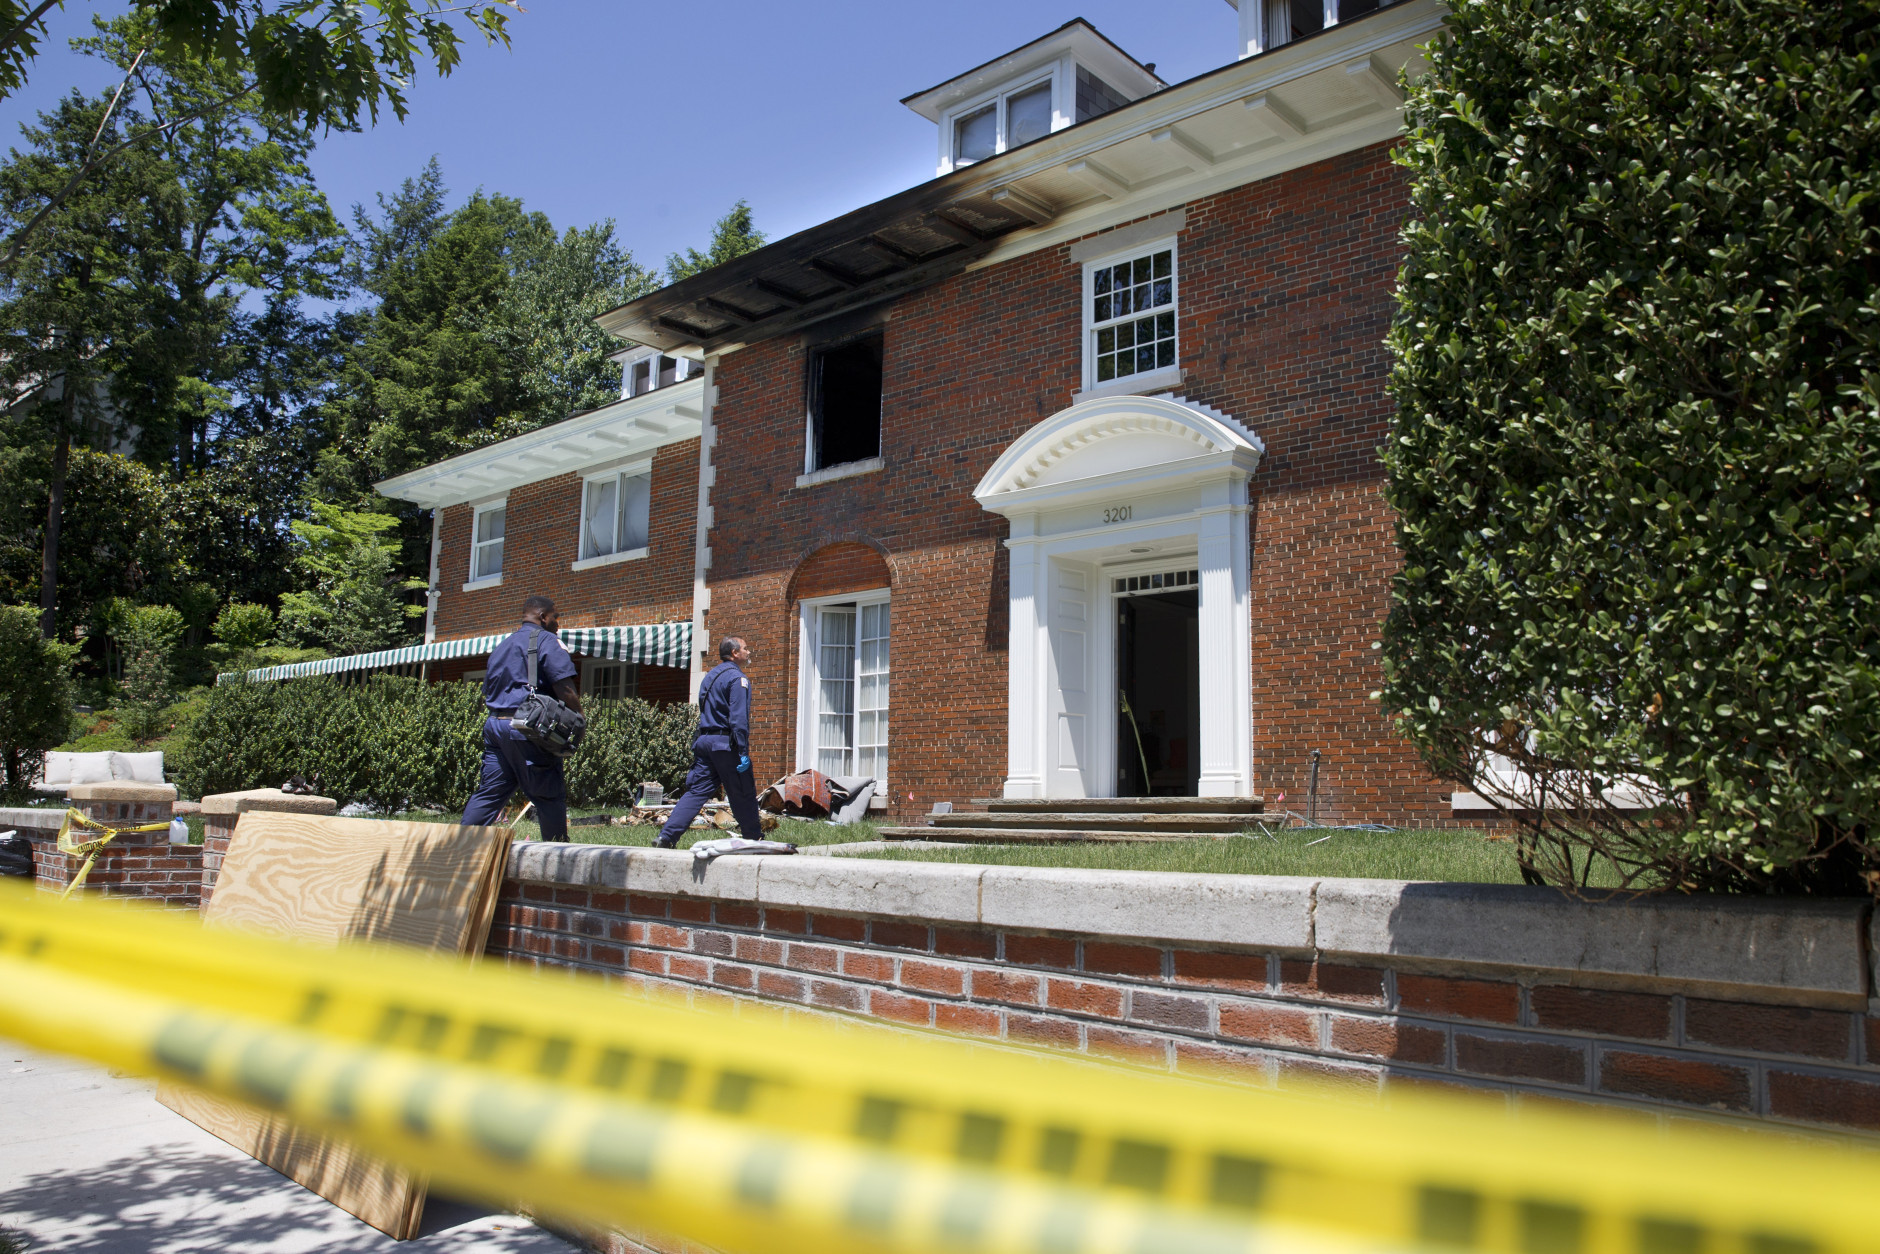 In this May 22, 2015, file photo, police continue working at a fire-damaged multimillion-dollar home in northwest Washington home where 46-year-old Savvas Savopoulos, his 47-year-old wife, Amy Savopoulos, the couple's 10-year-old son Philip, and housekeeper Veralicia Figueroa were found dead May 14. DNA from a man accused in the slayings of wealthy Washington family and their housekeeper was found on a construction vest inside a car stolen from the family's home, and a man driving the car was seen wearing a similar vest in the aftermath of the slayings, a detective testified July 20. (AP Photo/Jacquelyn Martin, File)